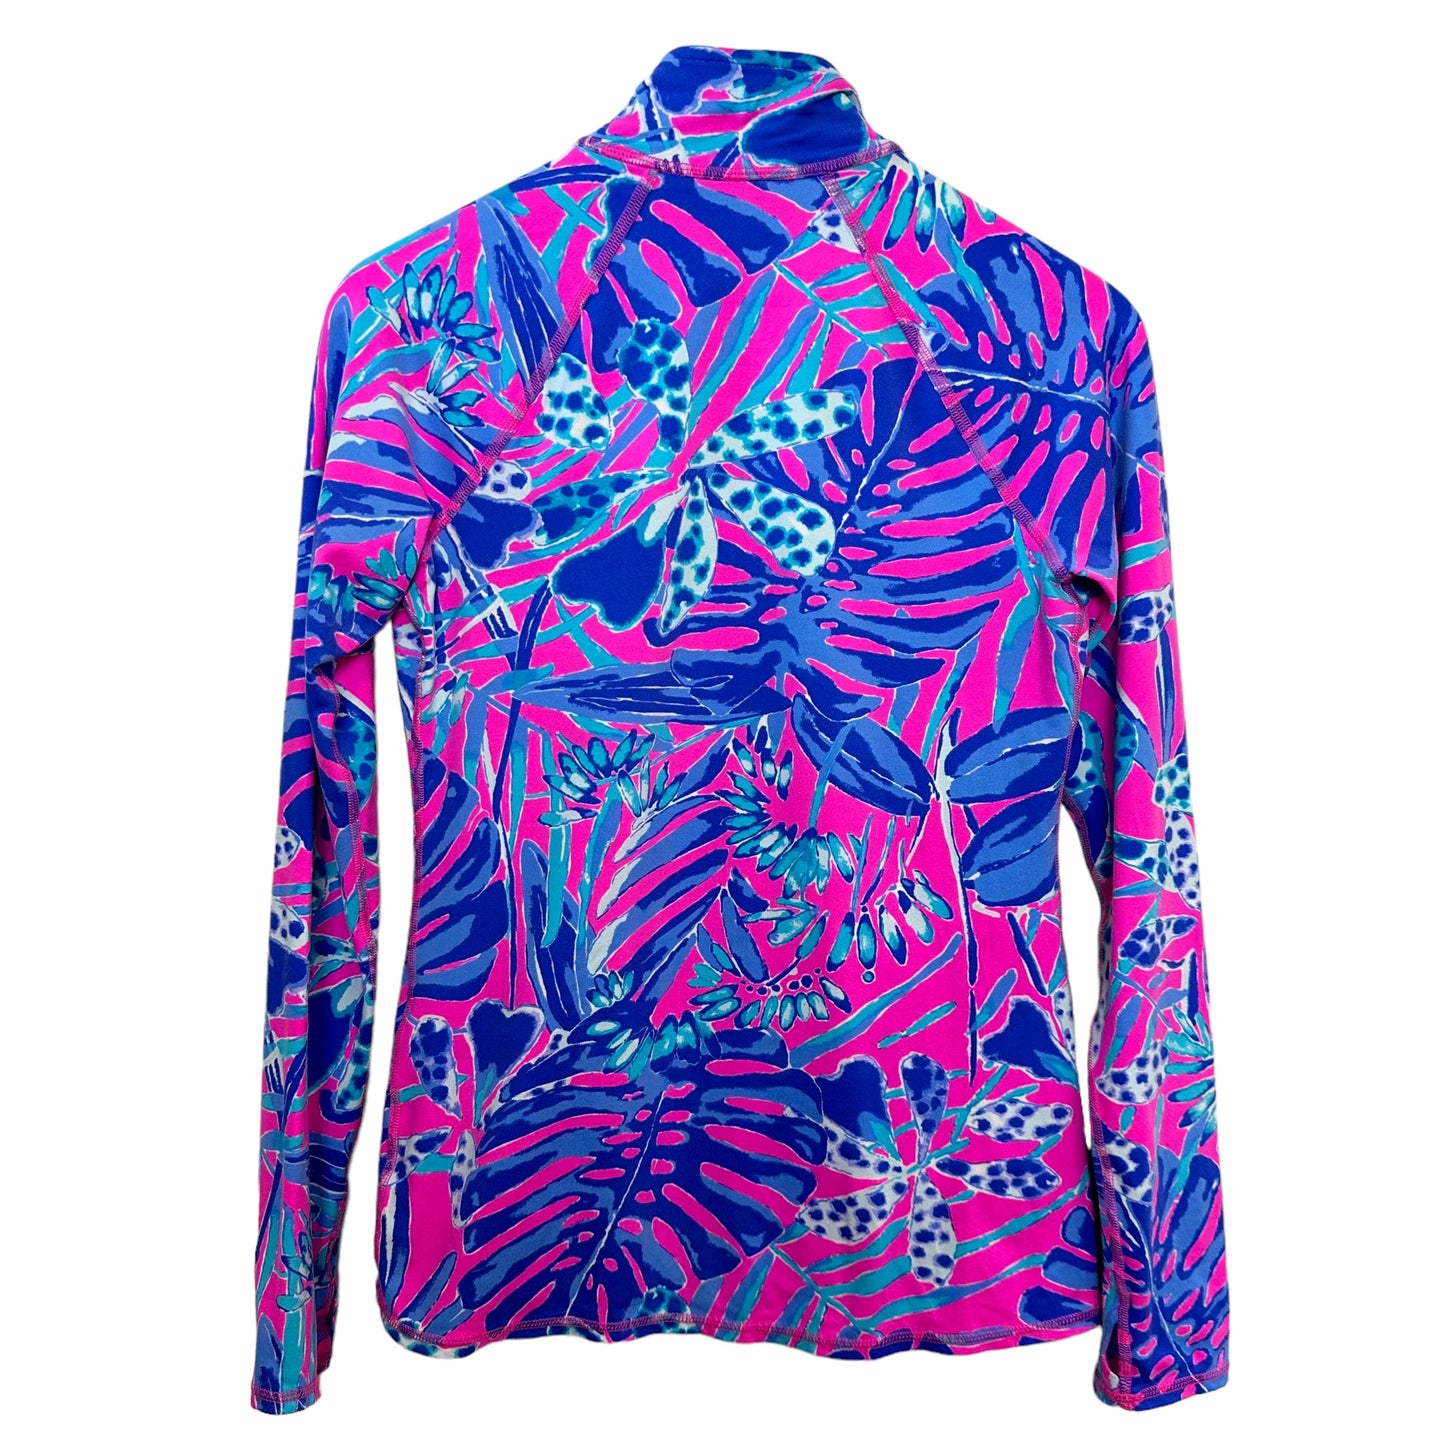 Lilly Pulitzer Luxletic Serena Jacket Pink Blue Palm Floral Print XS